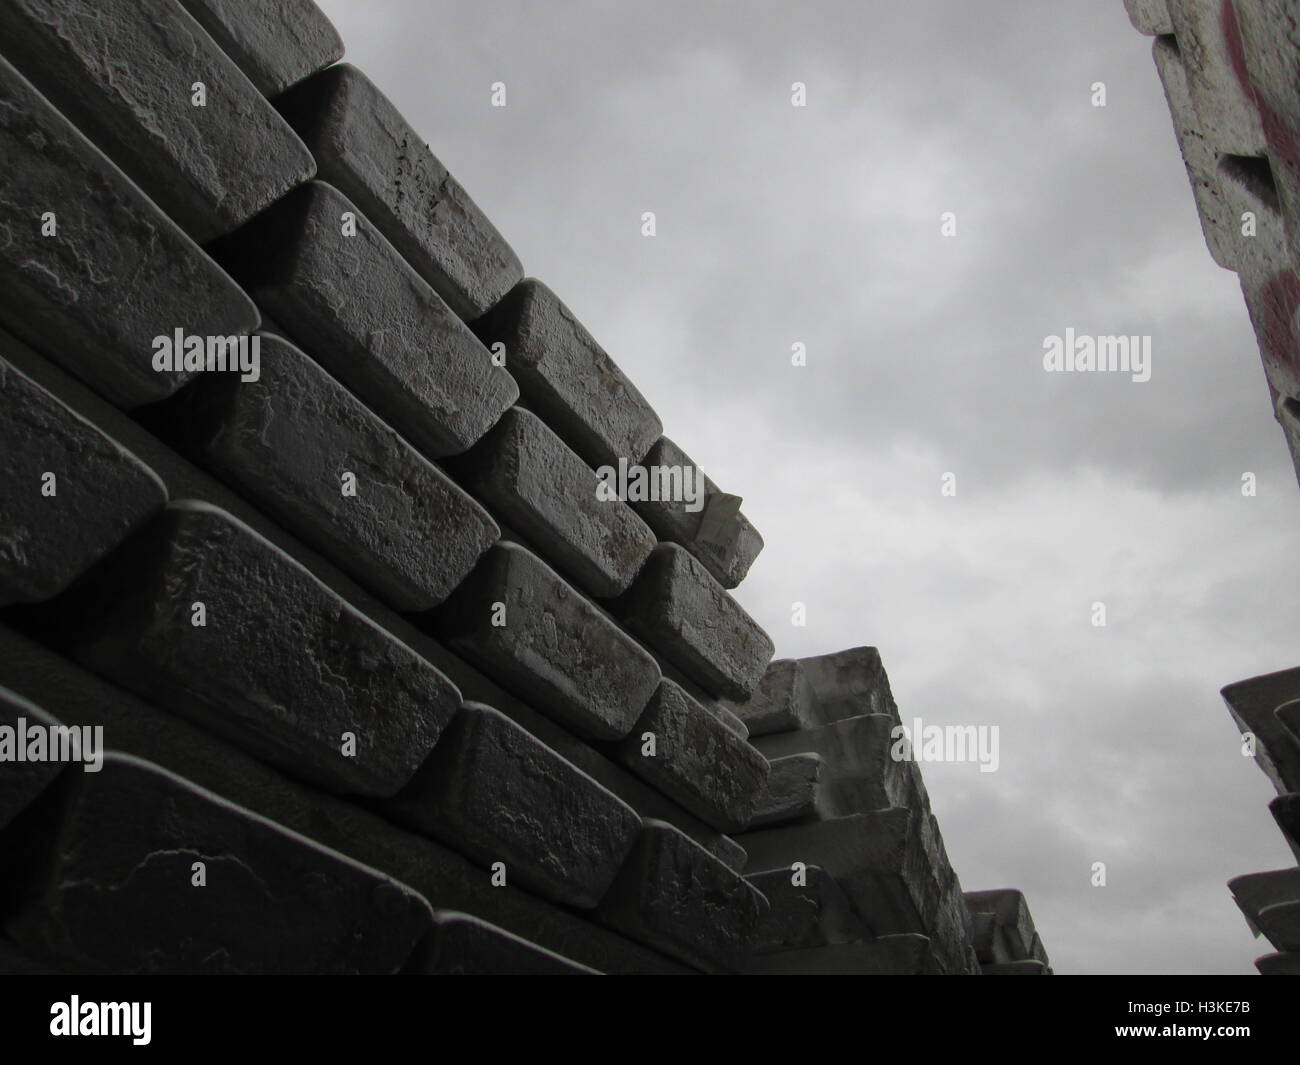 Puerto Ordaz, Venezuela, 10 October 2016.  Weather in Venezuela. Fully it dawned cloudy day in the city this South American country. This image shows a stack of several aluminum ingots produced in an aluminum reduction plant, these companies are mostly in this area of the country, on the photo completely gray sky in the background can be seen. Jorgeprz / Alamy Live News. Stock Photo